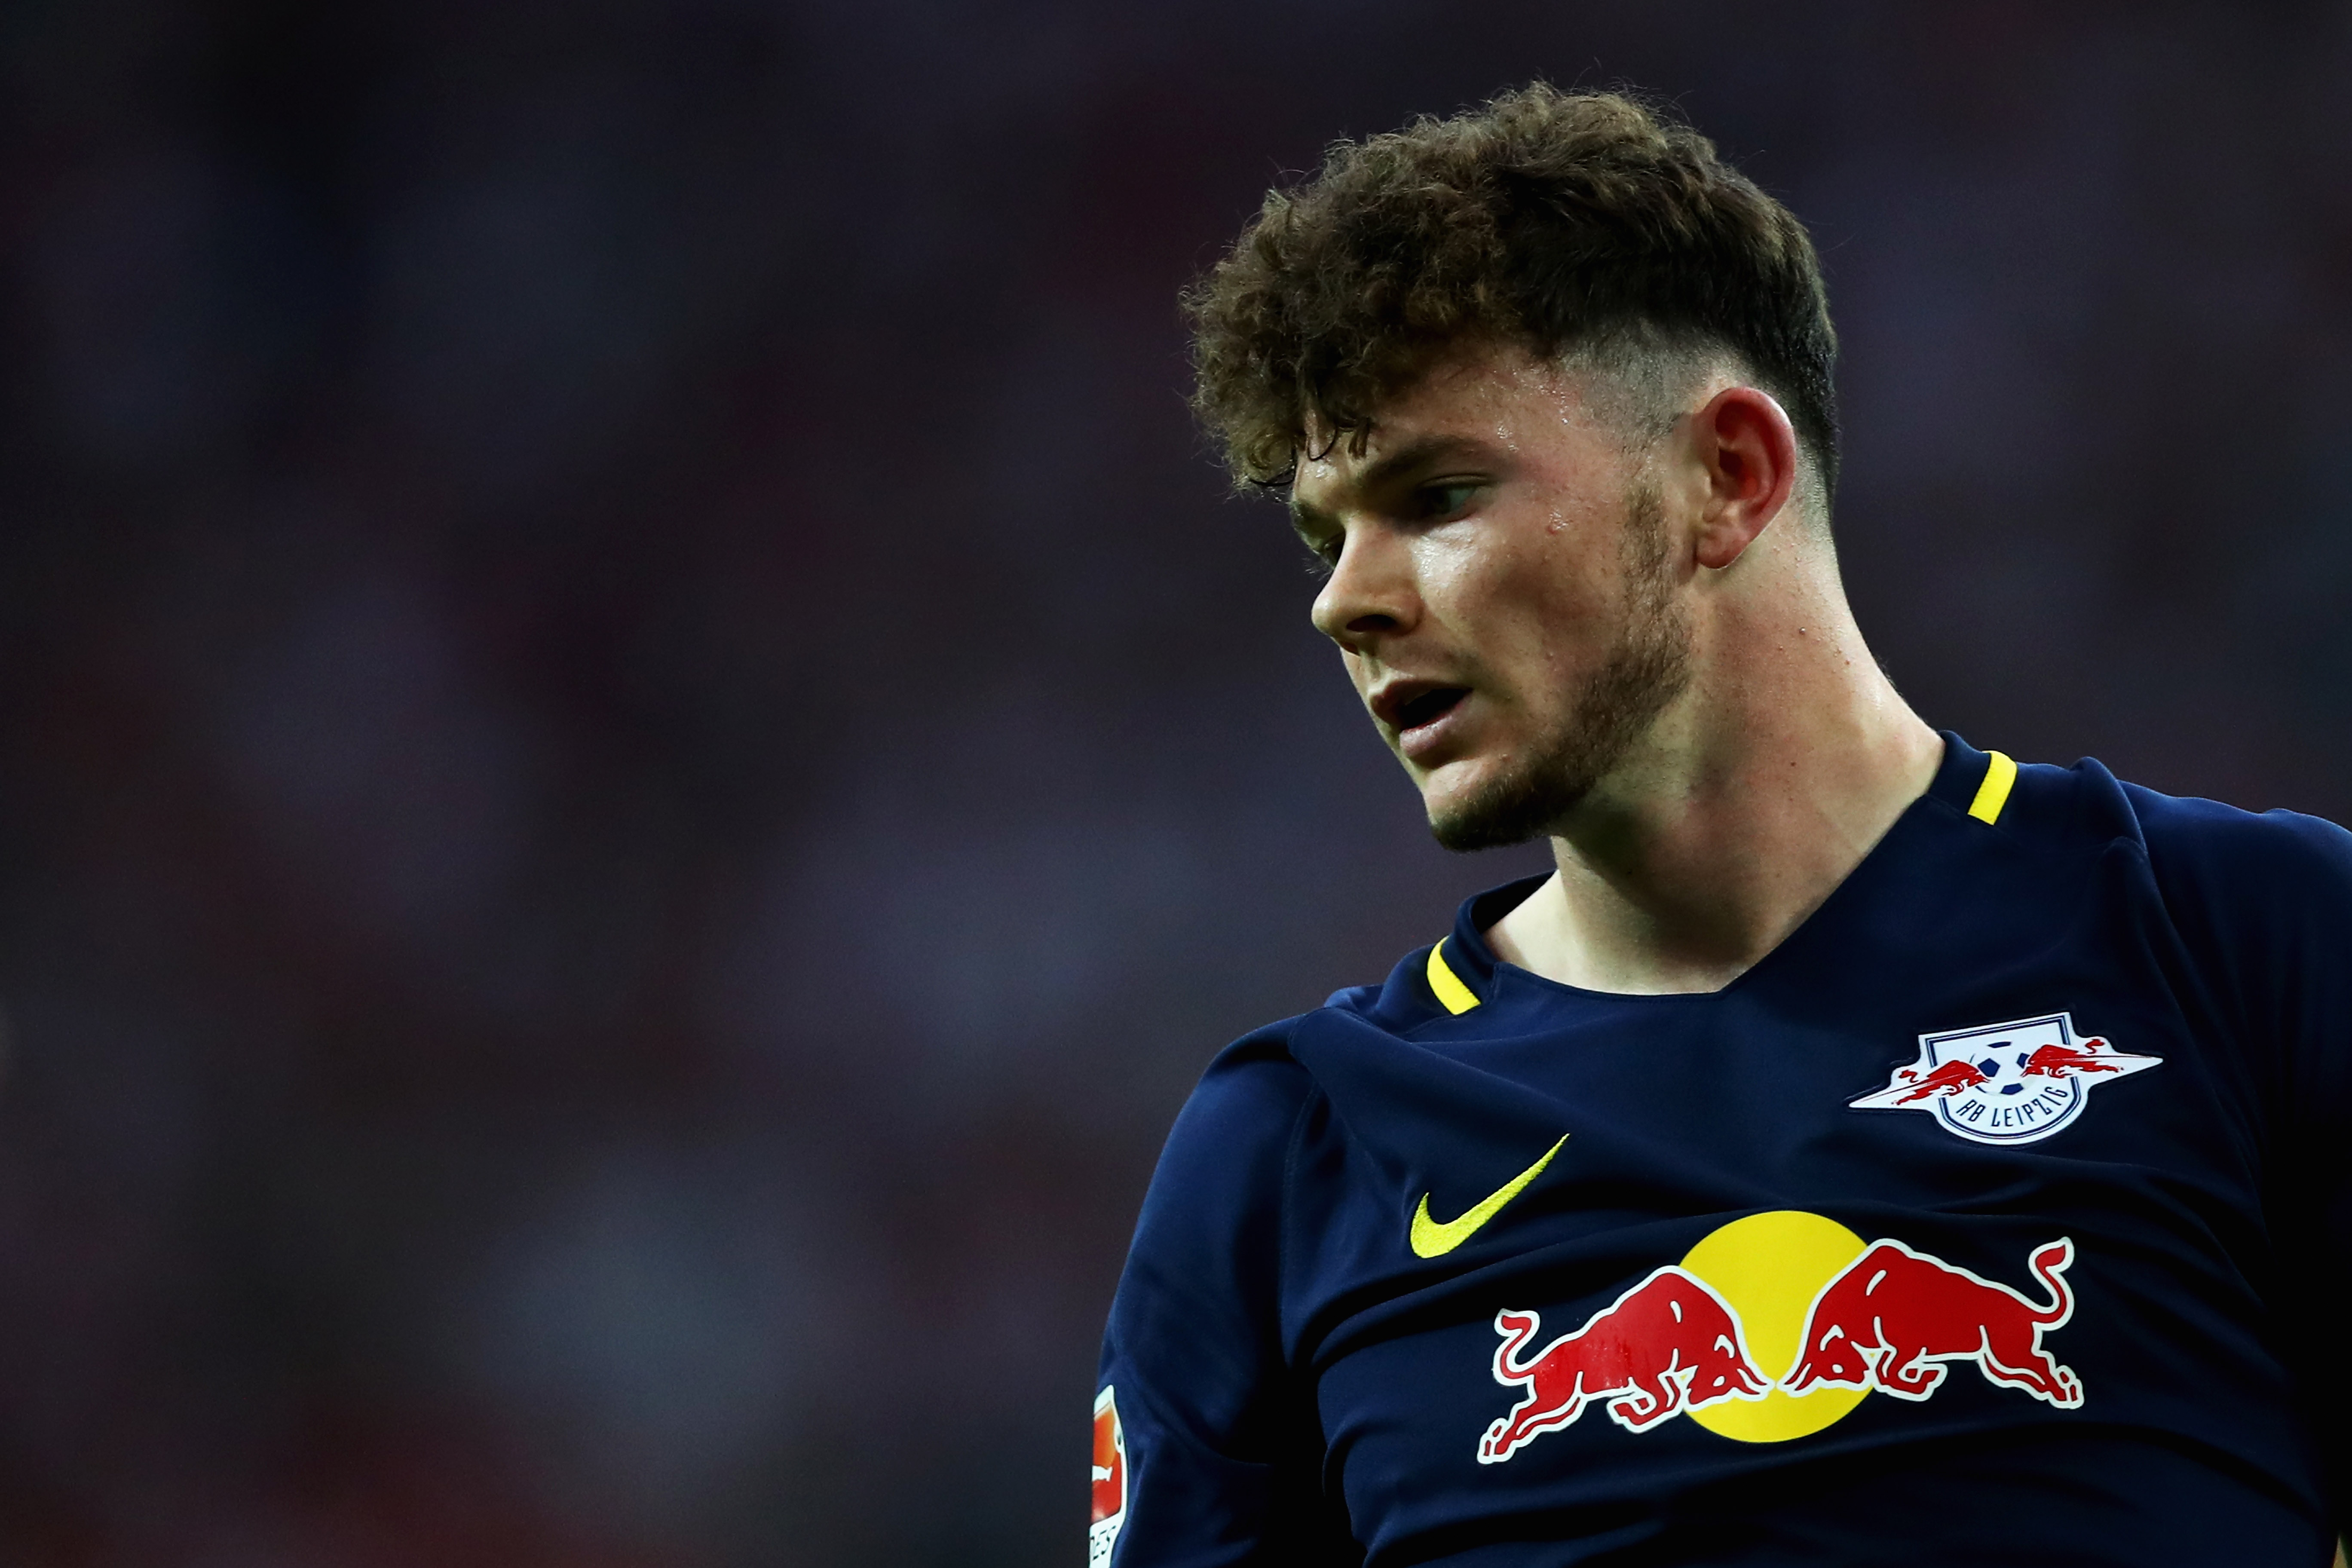 COLOGNE, GERMANY - SEPTEMBER 25:  Oliver Burke of RB Leipzig looks on during the Bundesliga match between 1. FC Koeln and RB Leipzig at RheinEnergieStadion on September 25, 2016 in Cologne, Germany.  (Photo by Dean Mouhtaropoulos/Bongarts/Getty Images)